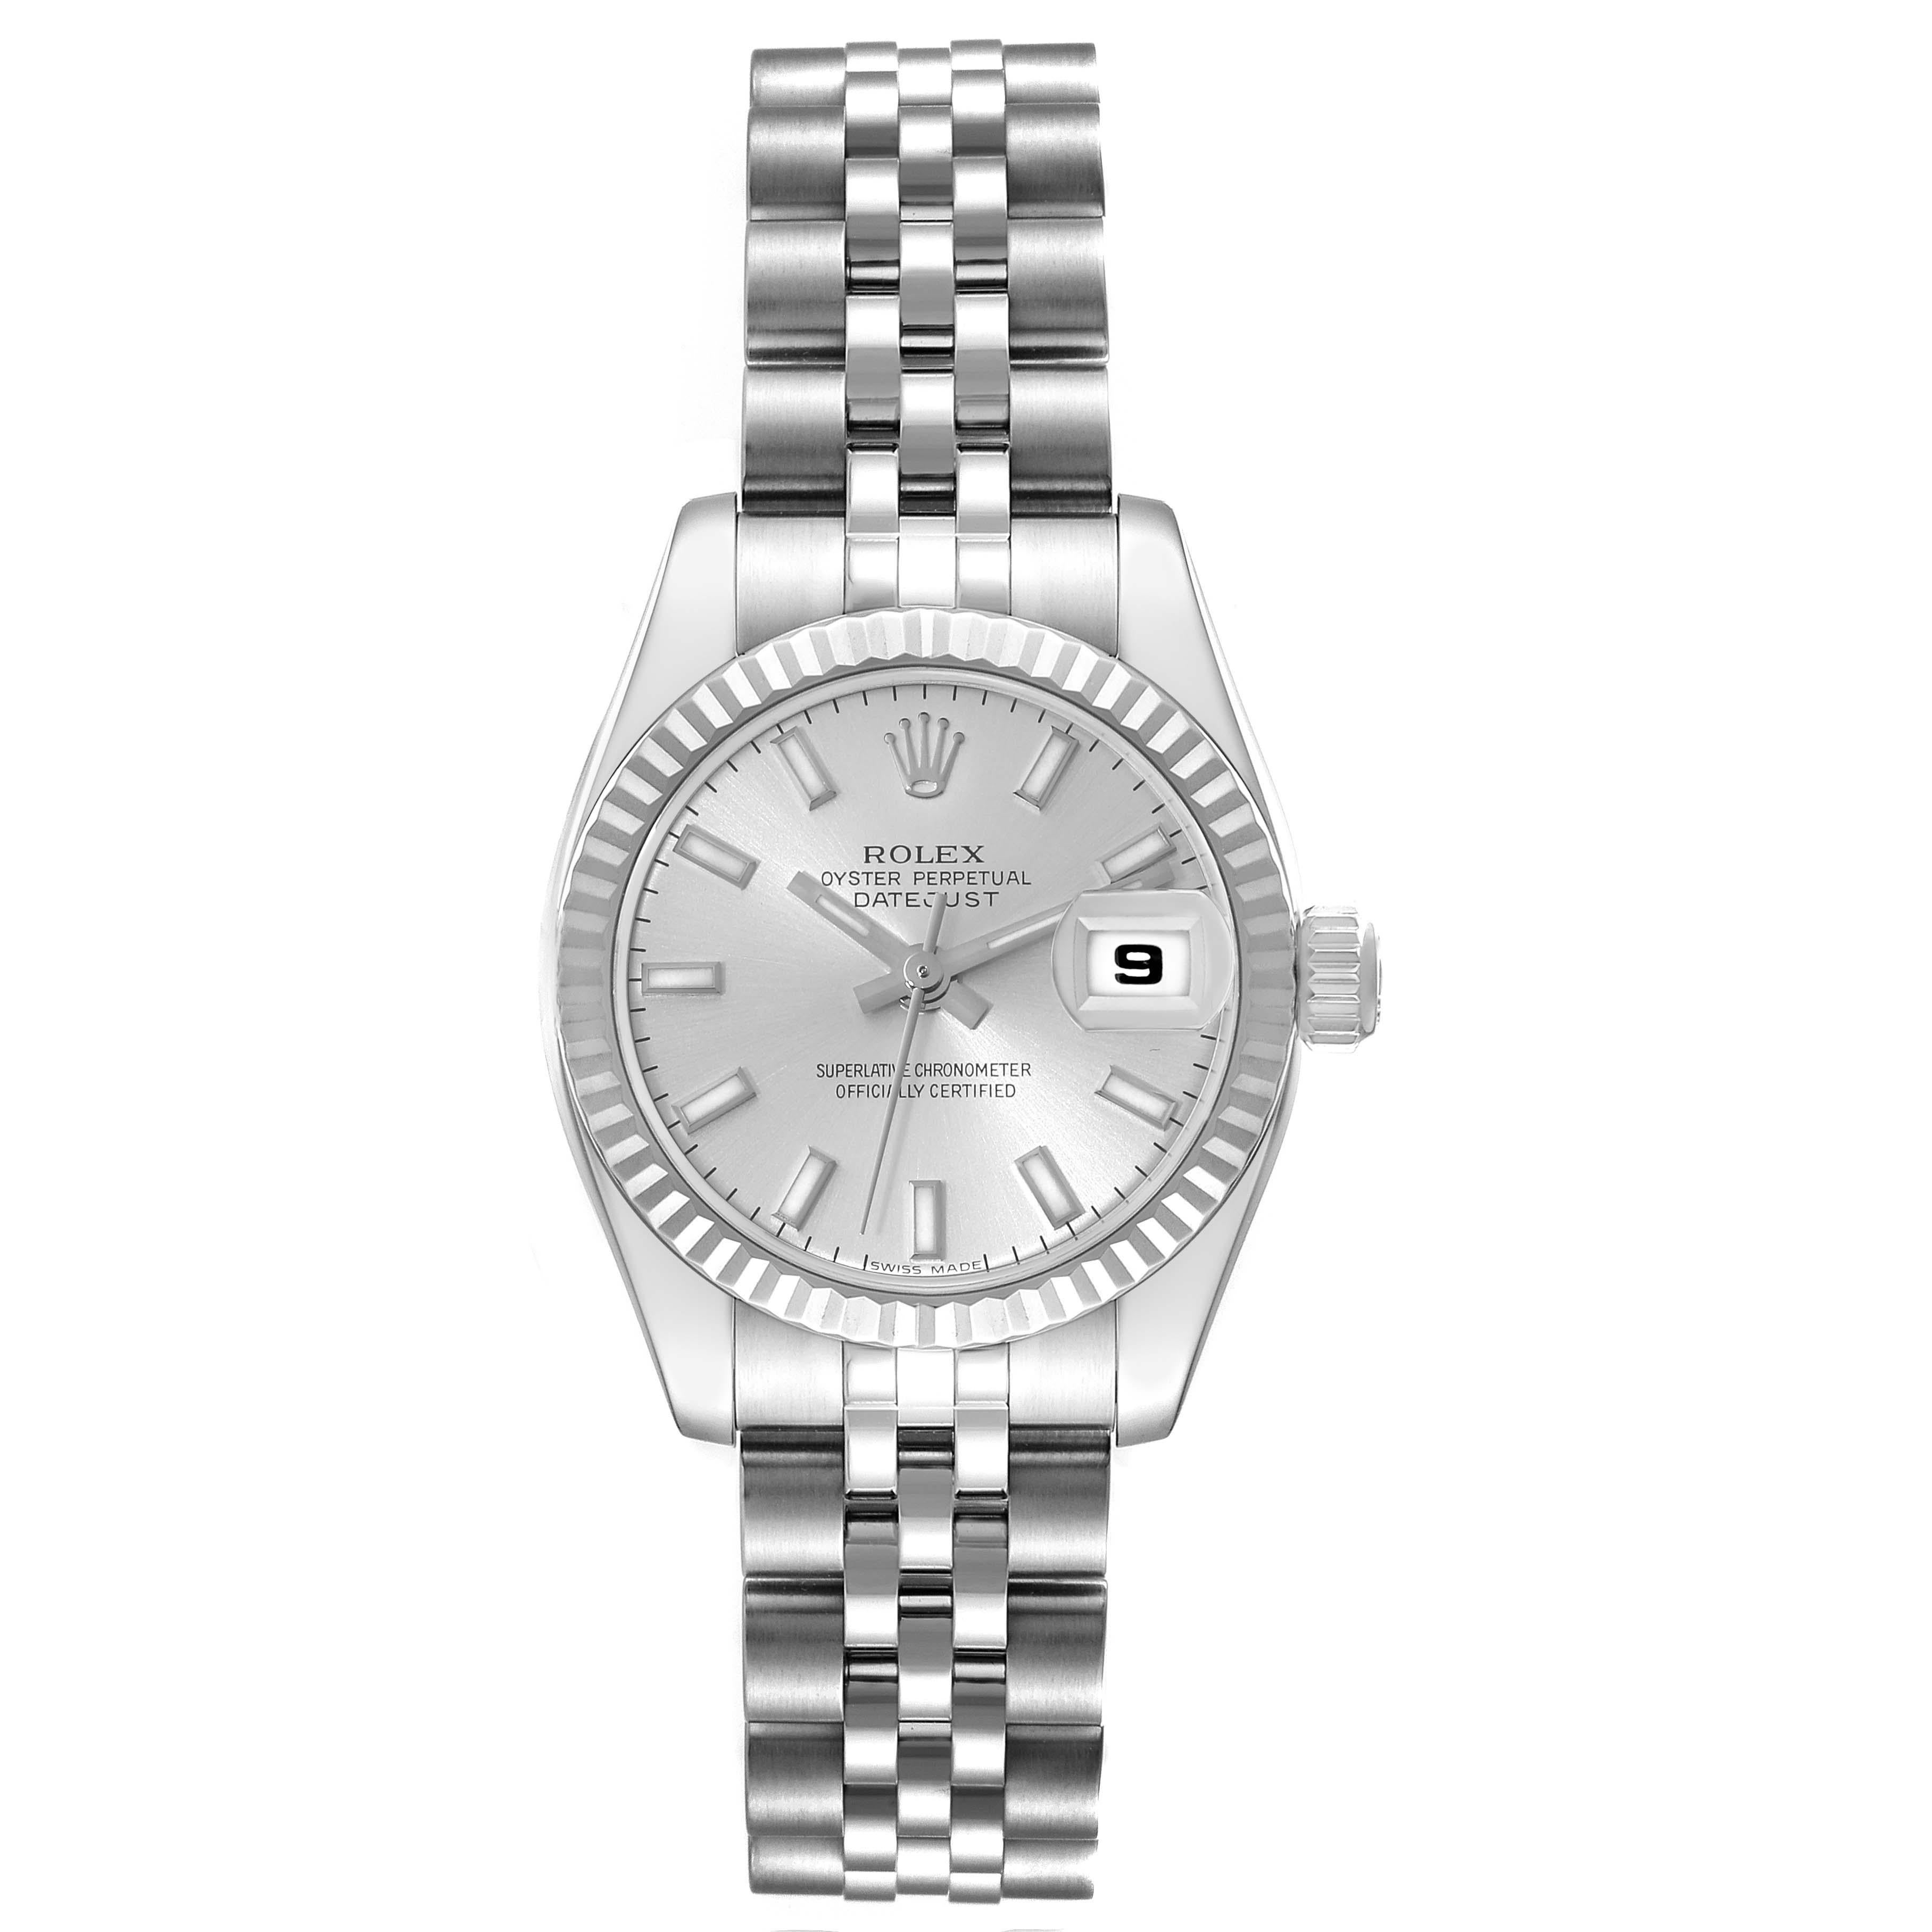 Rolex Datejust Steel White Gold Silver Dial Ladies Watch 179174 Box Papers For Sale 1